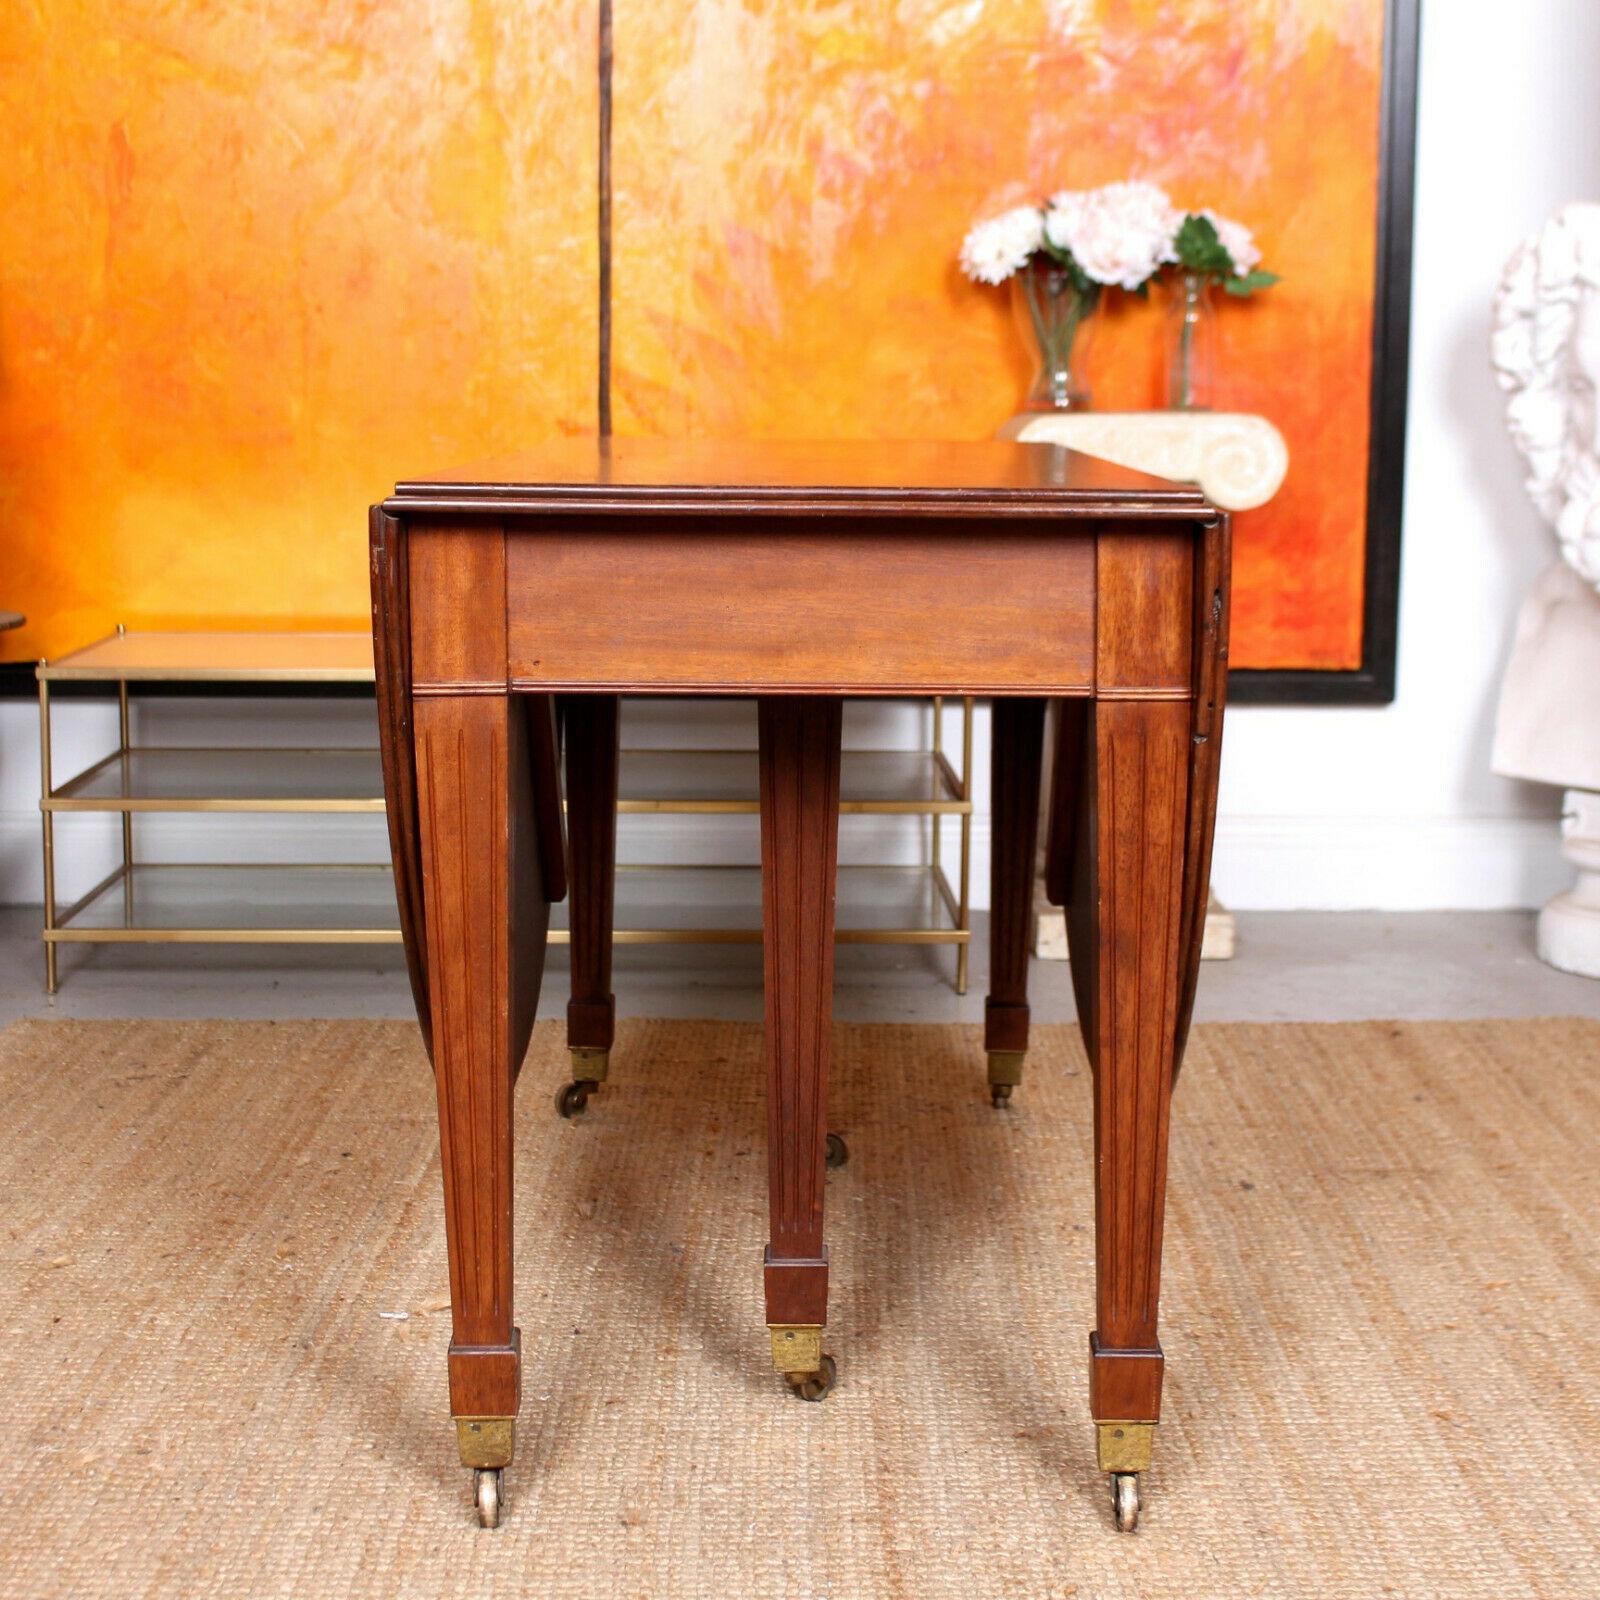 An impressive Edwardian gateleg dining table.
Constructed from thick cuts of solid oak boasting a well figured wild grain.
The top with twin chamfered edge having rounded ends supported on square fluted tapering legs with brass cappings and